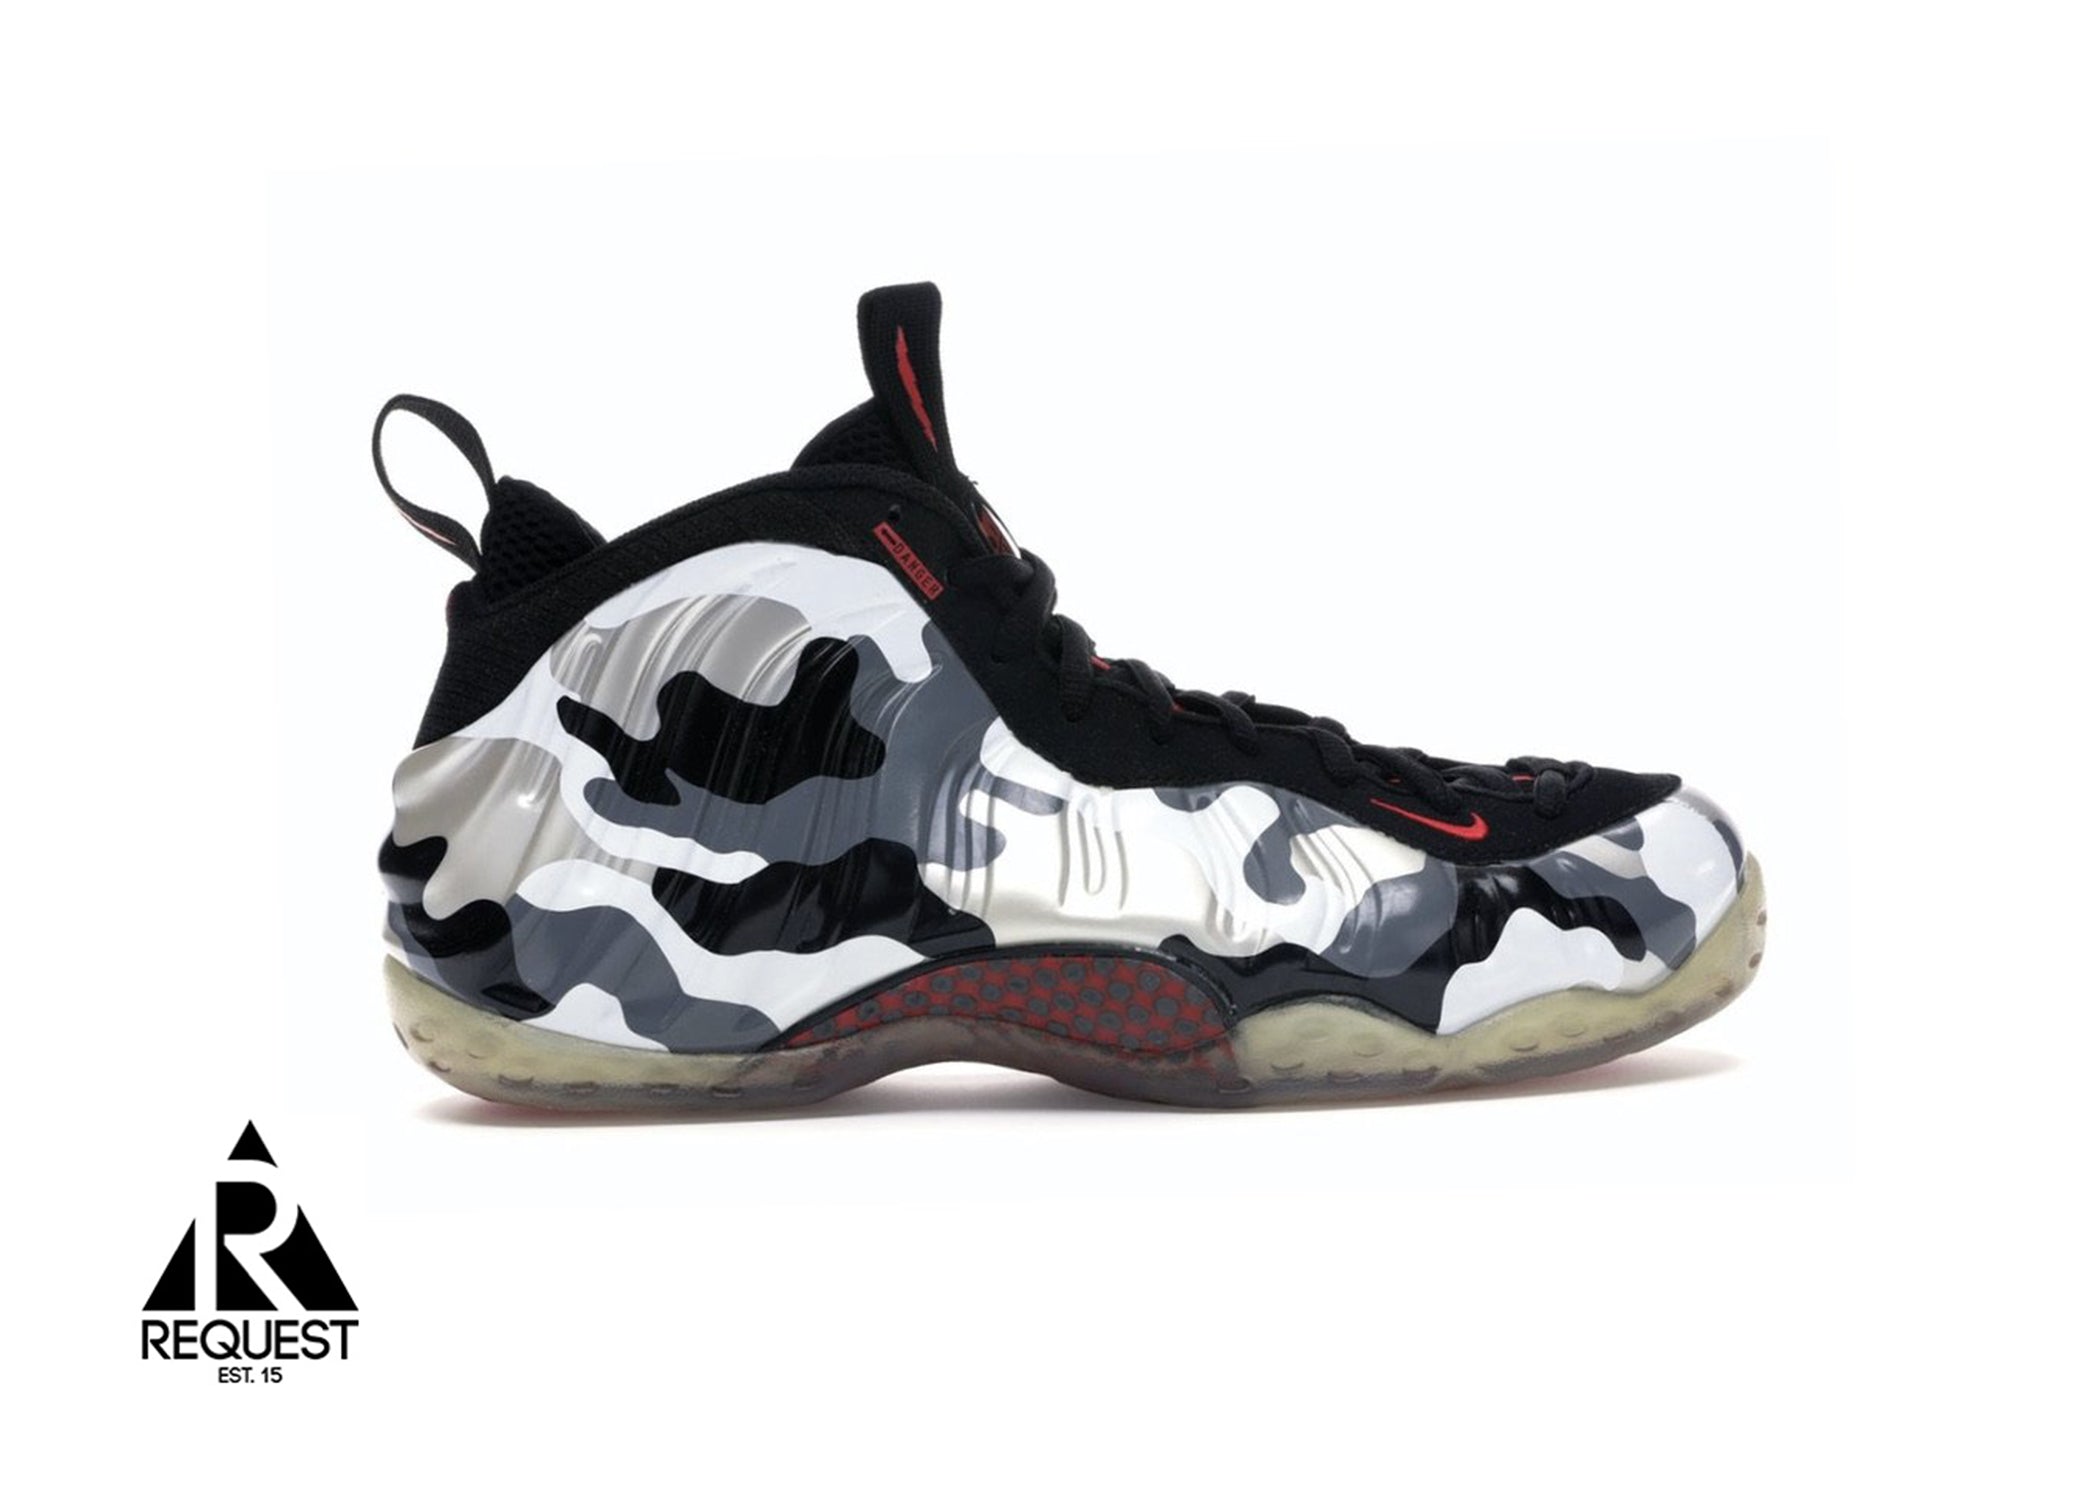 Nike Air Foamposite One “Fighter Jet”